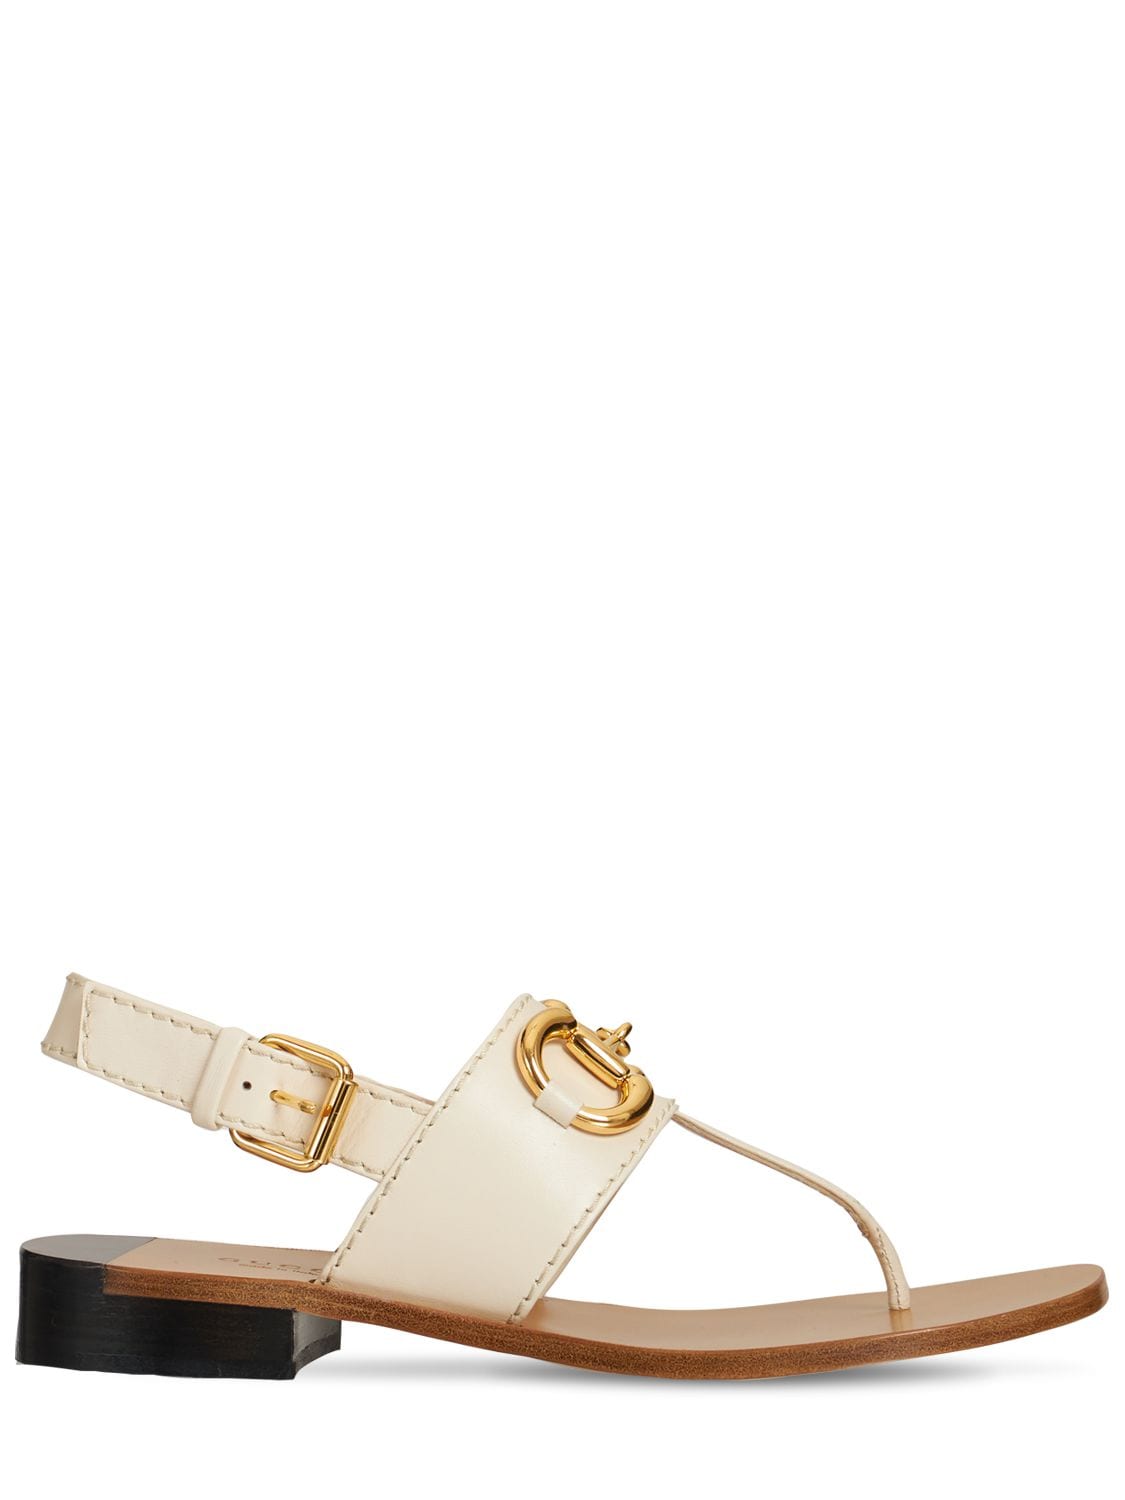 Gucci - 25mm baby leather thong sandals - Off-White | Luisaviaroma